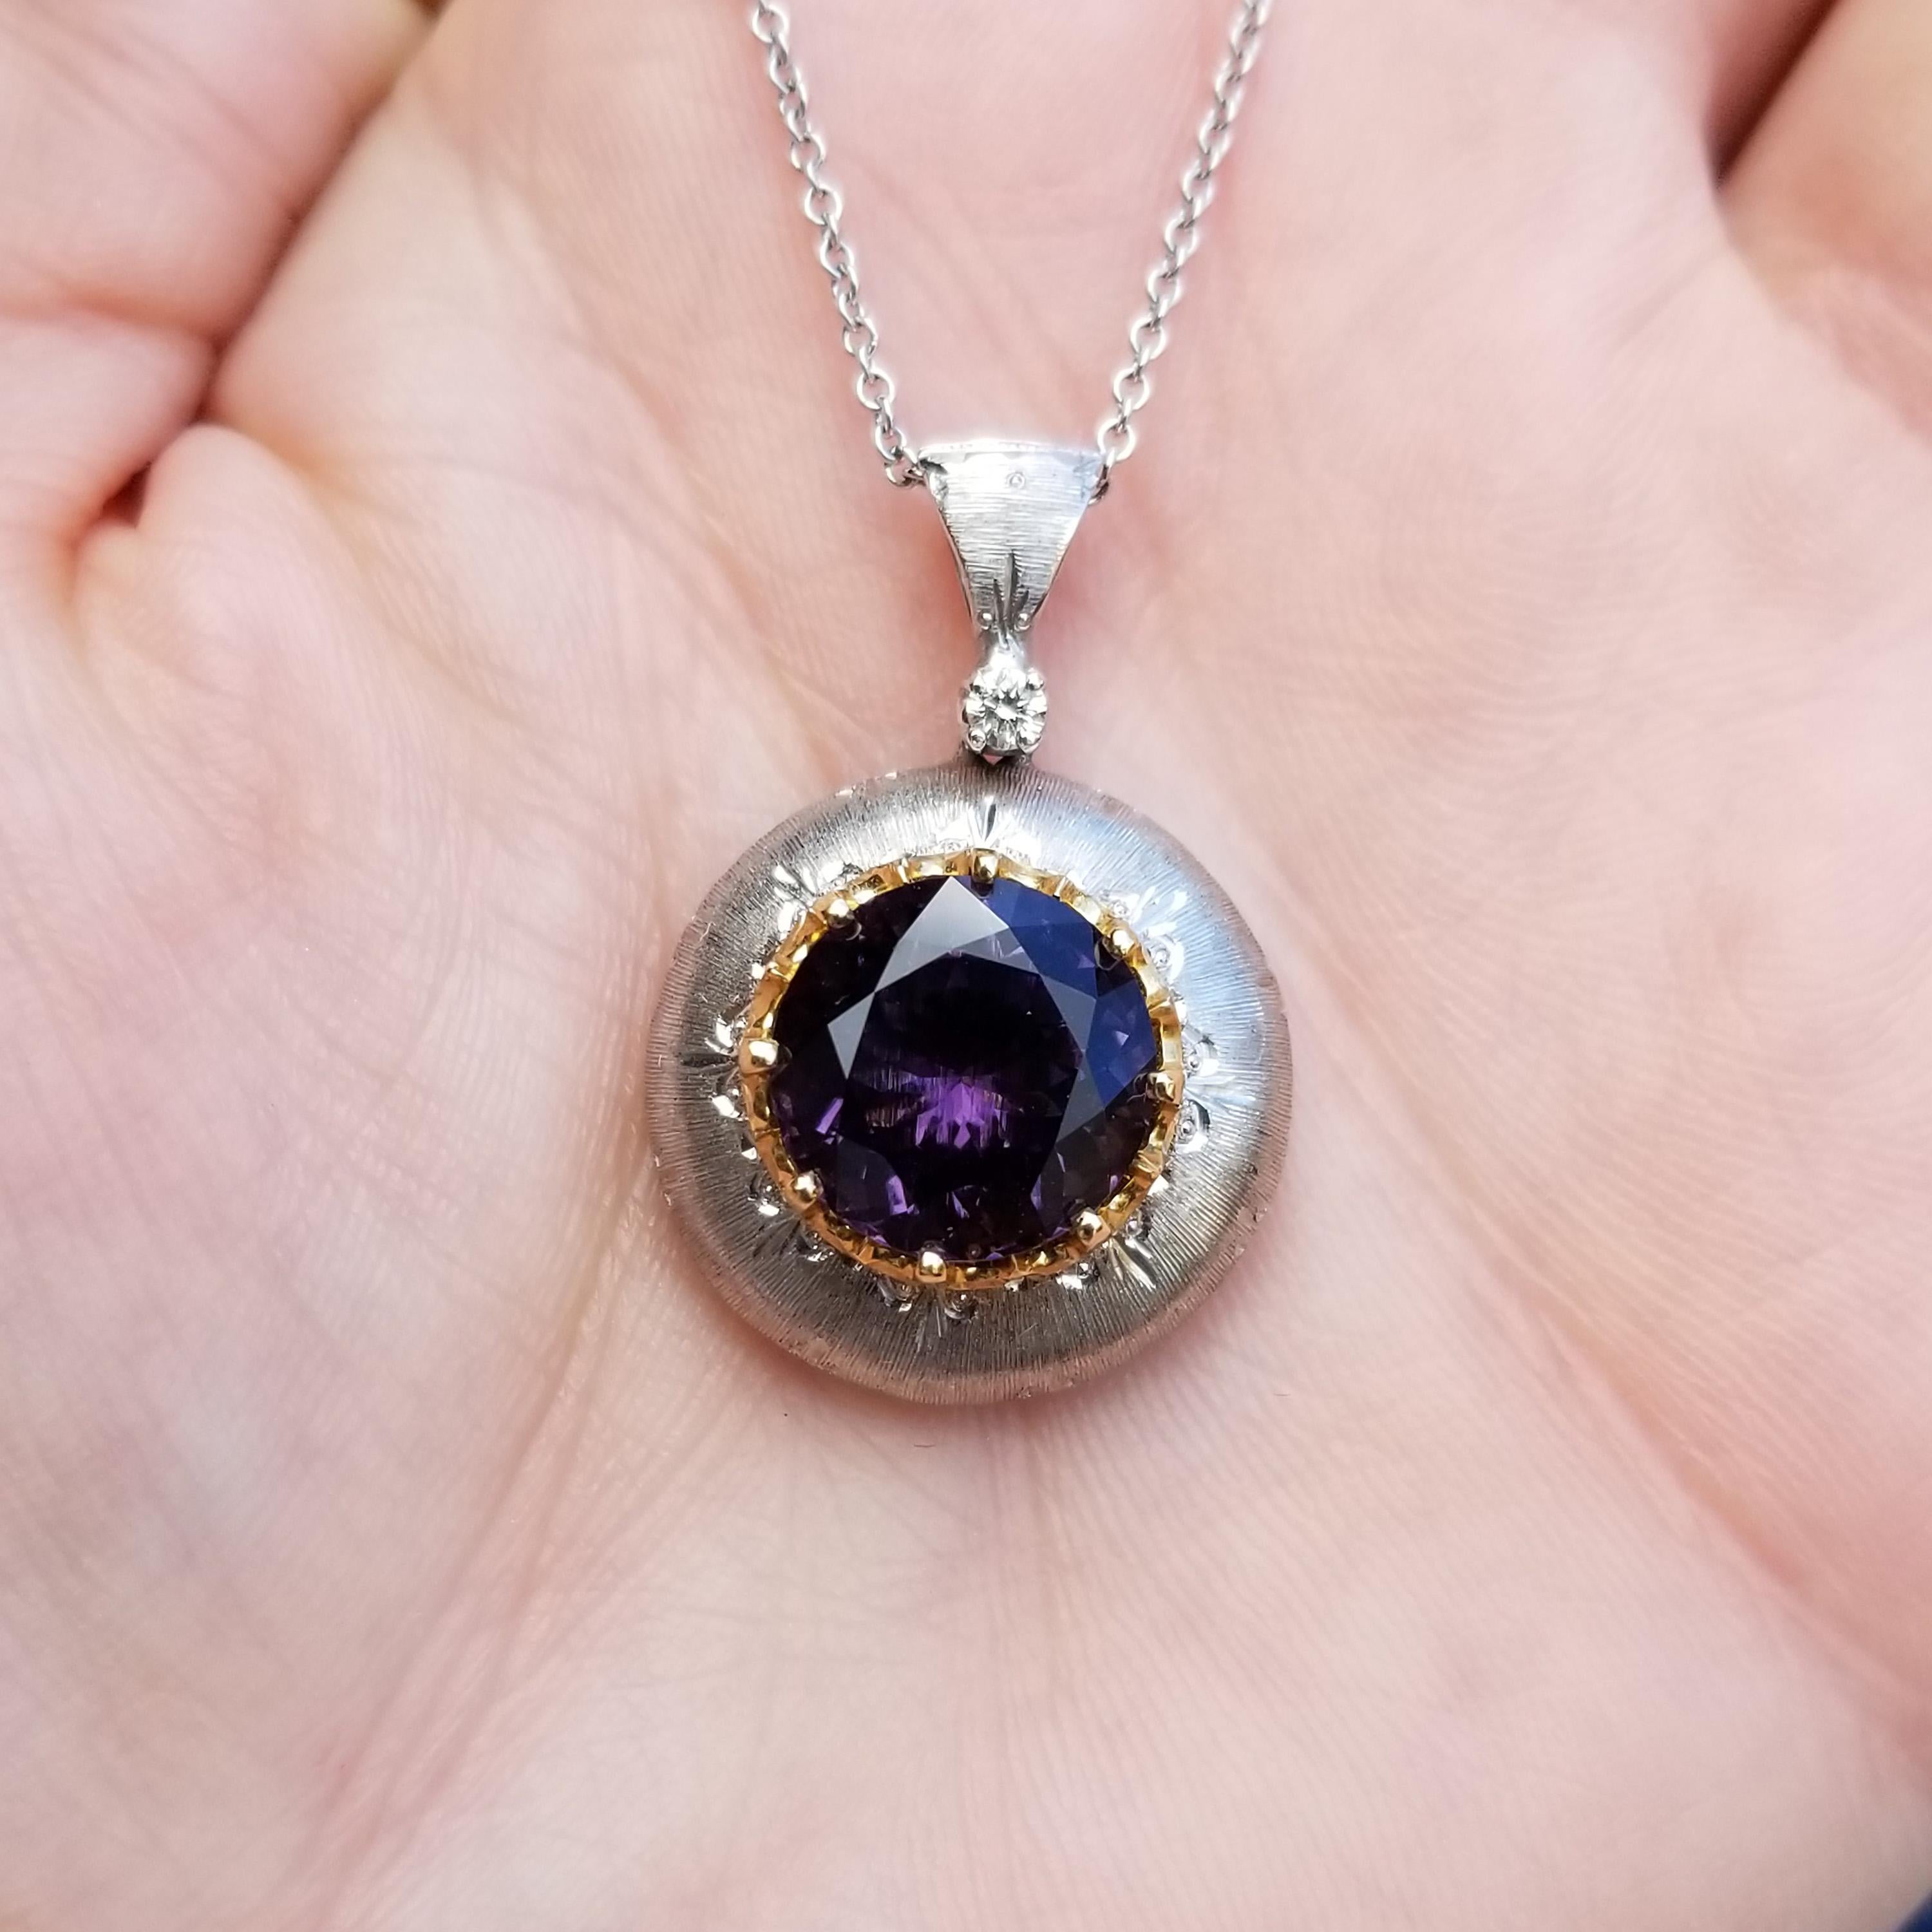 A richly-hued Tanzanian scapolite nestles deeply into this elegant pendant necklace. The scapolite features a cool silvery-purple tone very unlike any other purple gemstone. The beautiful cut ensures a lively and eye-catching gem.

